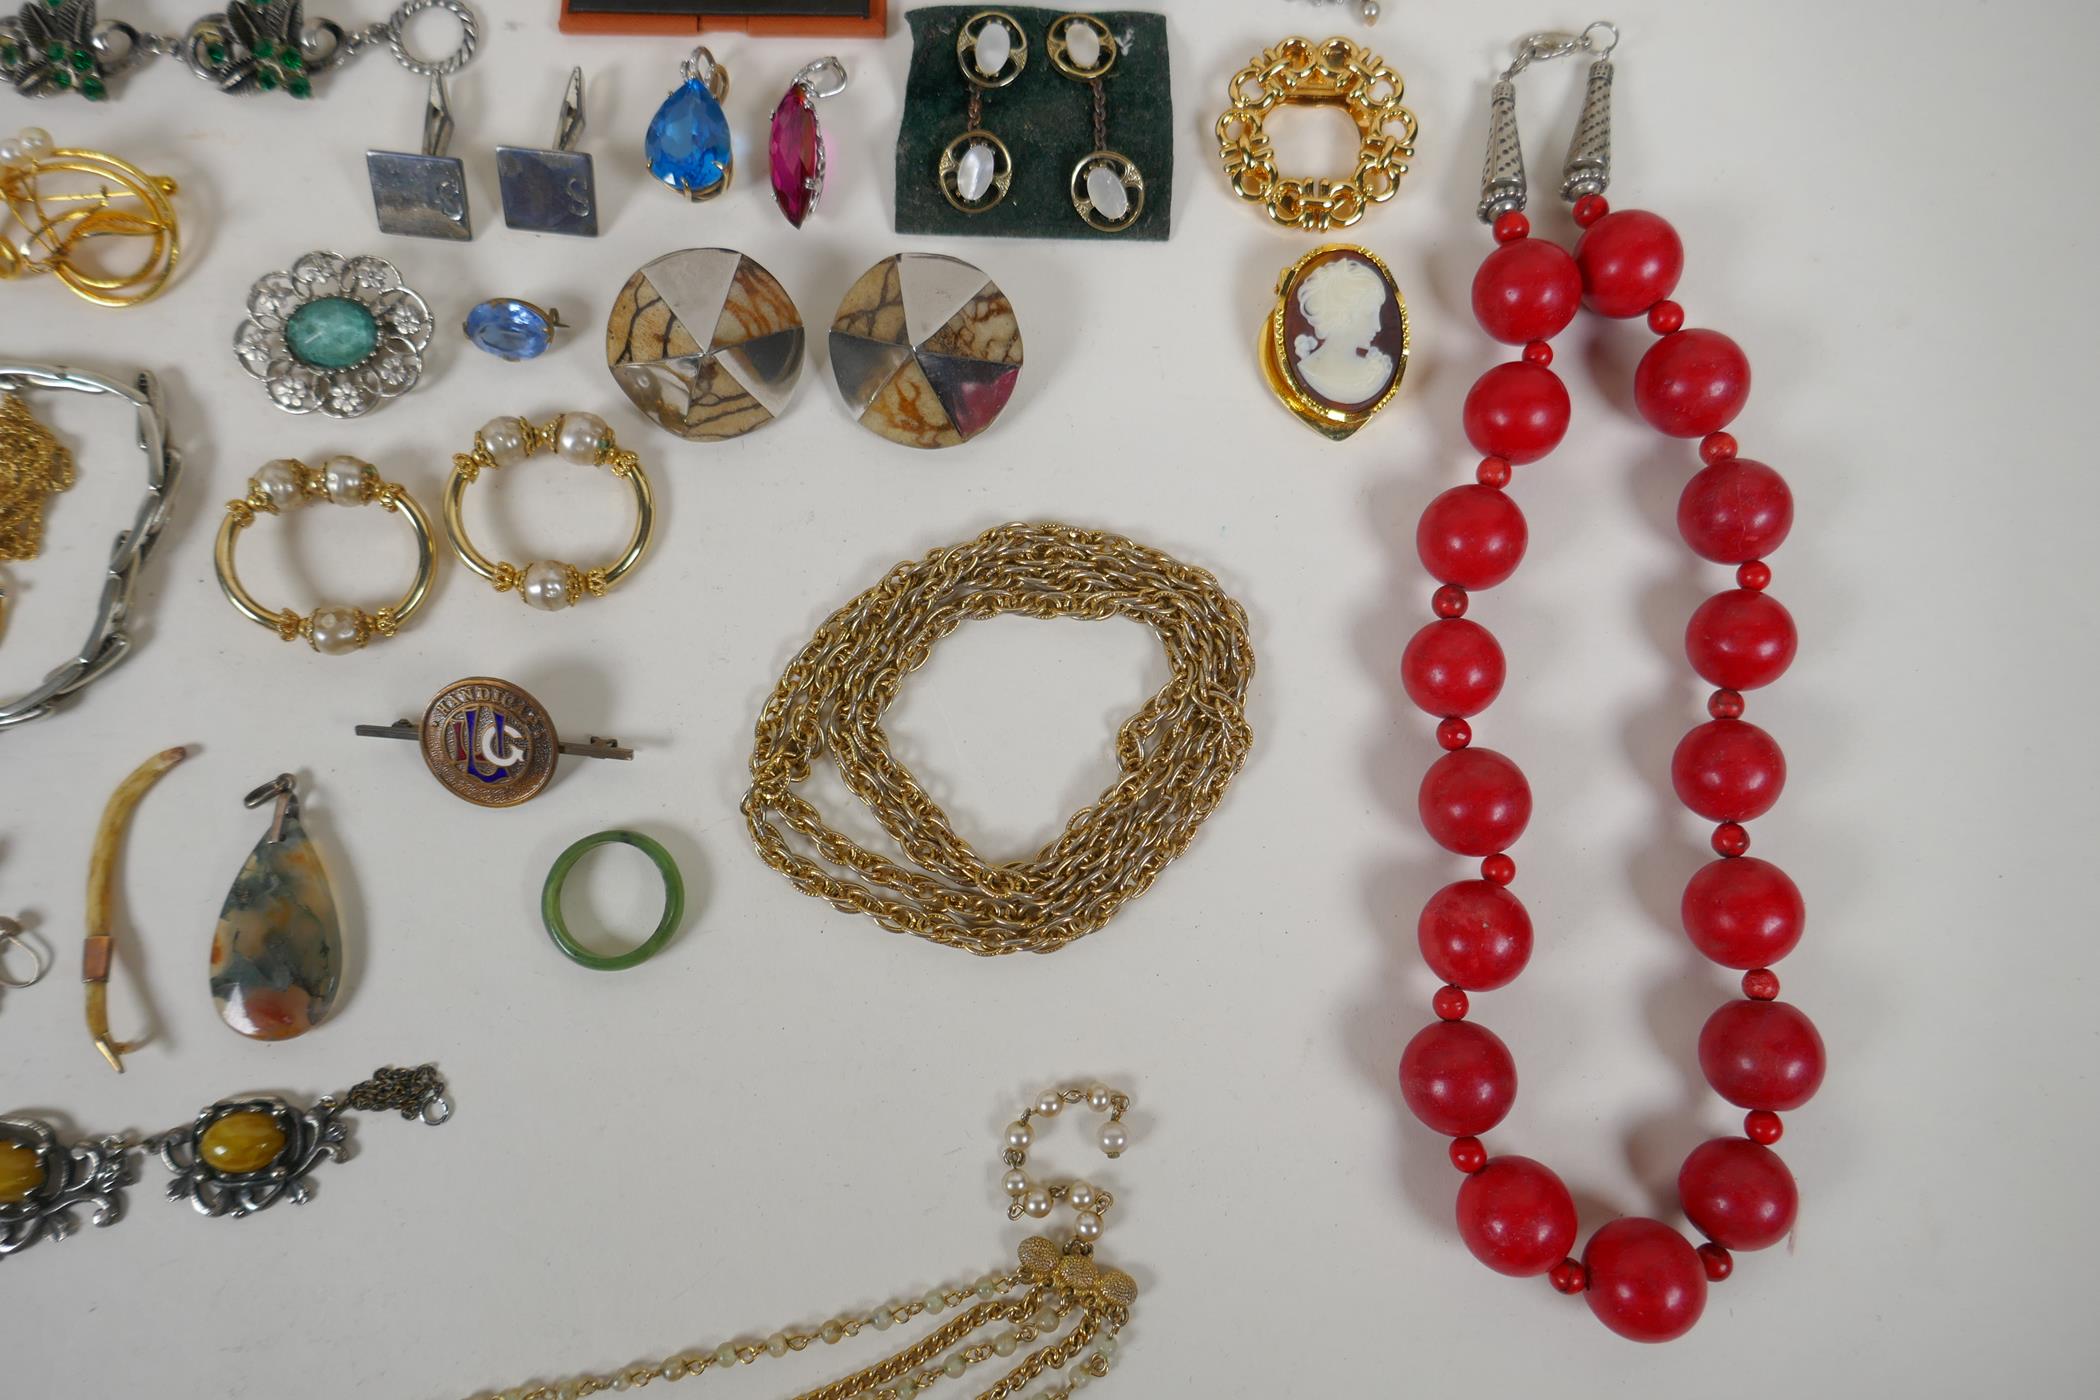 A collection of good quality vintage costume jewellery including brooches, necklaces, earrings, - Image 3 of 8